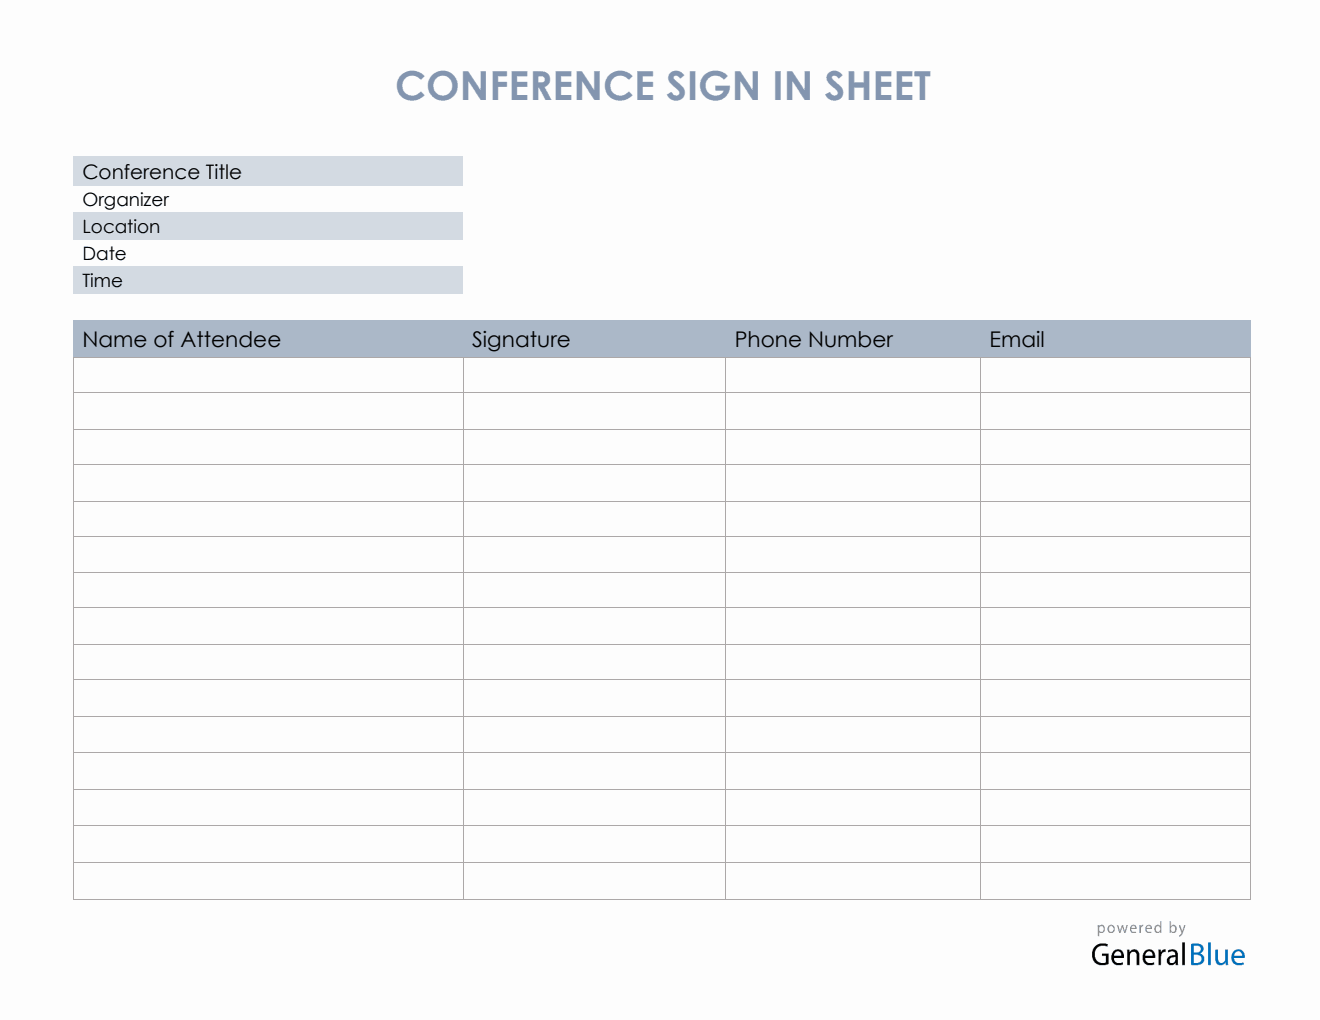 Conference Sign In Sheet in PDF